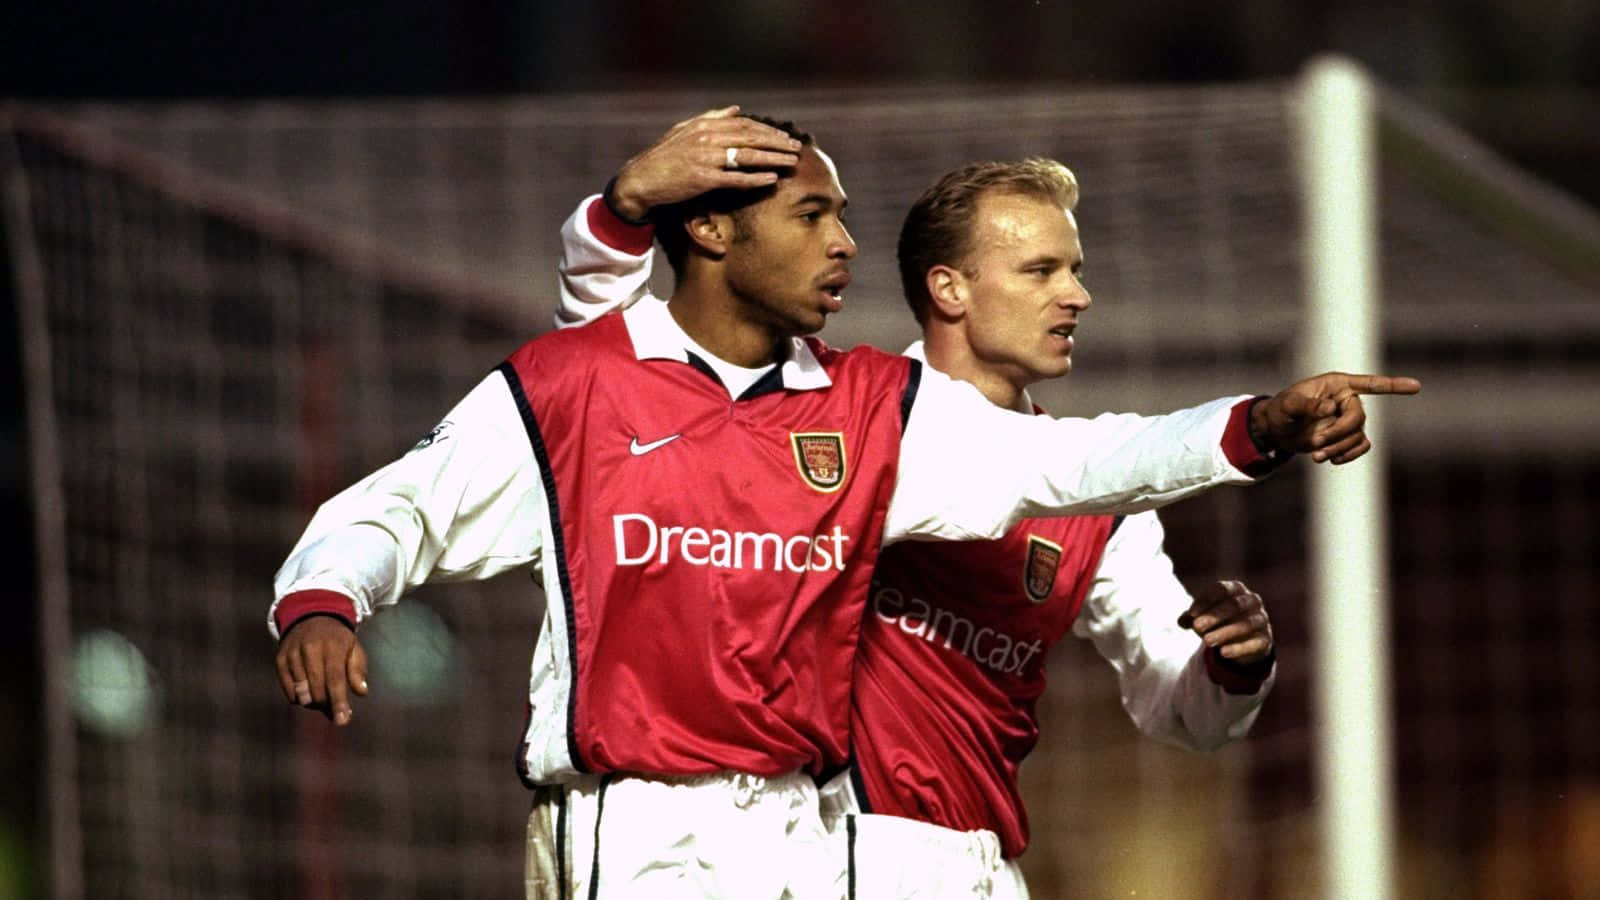 Dennis Bergkamp and Thierry Henry Showcasing Skills During Match with Derby County Wallpaper